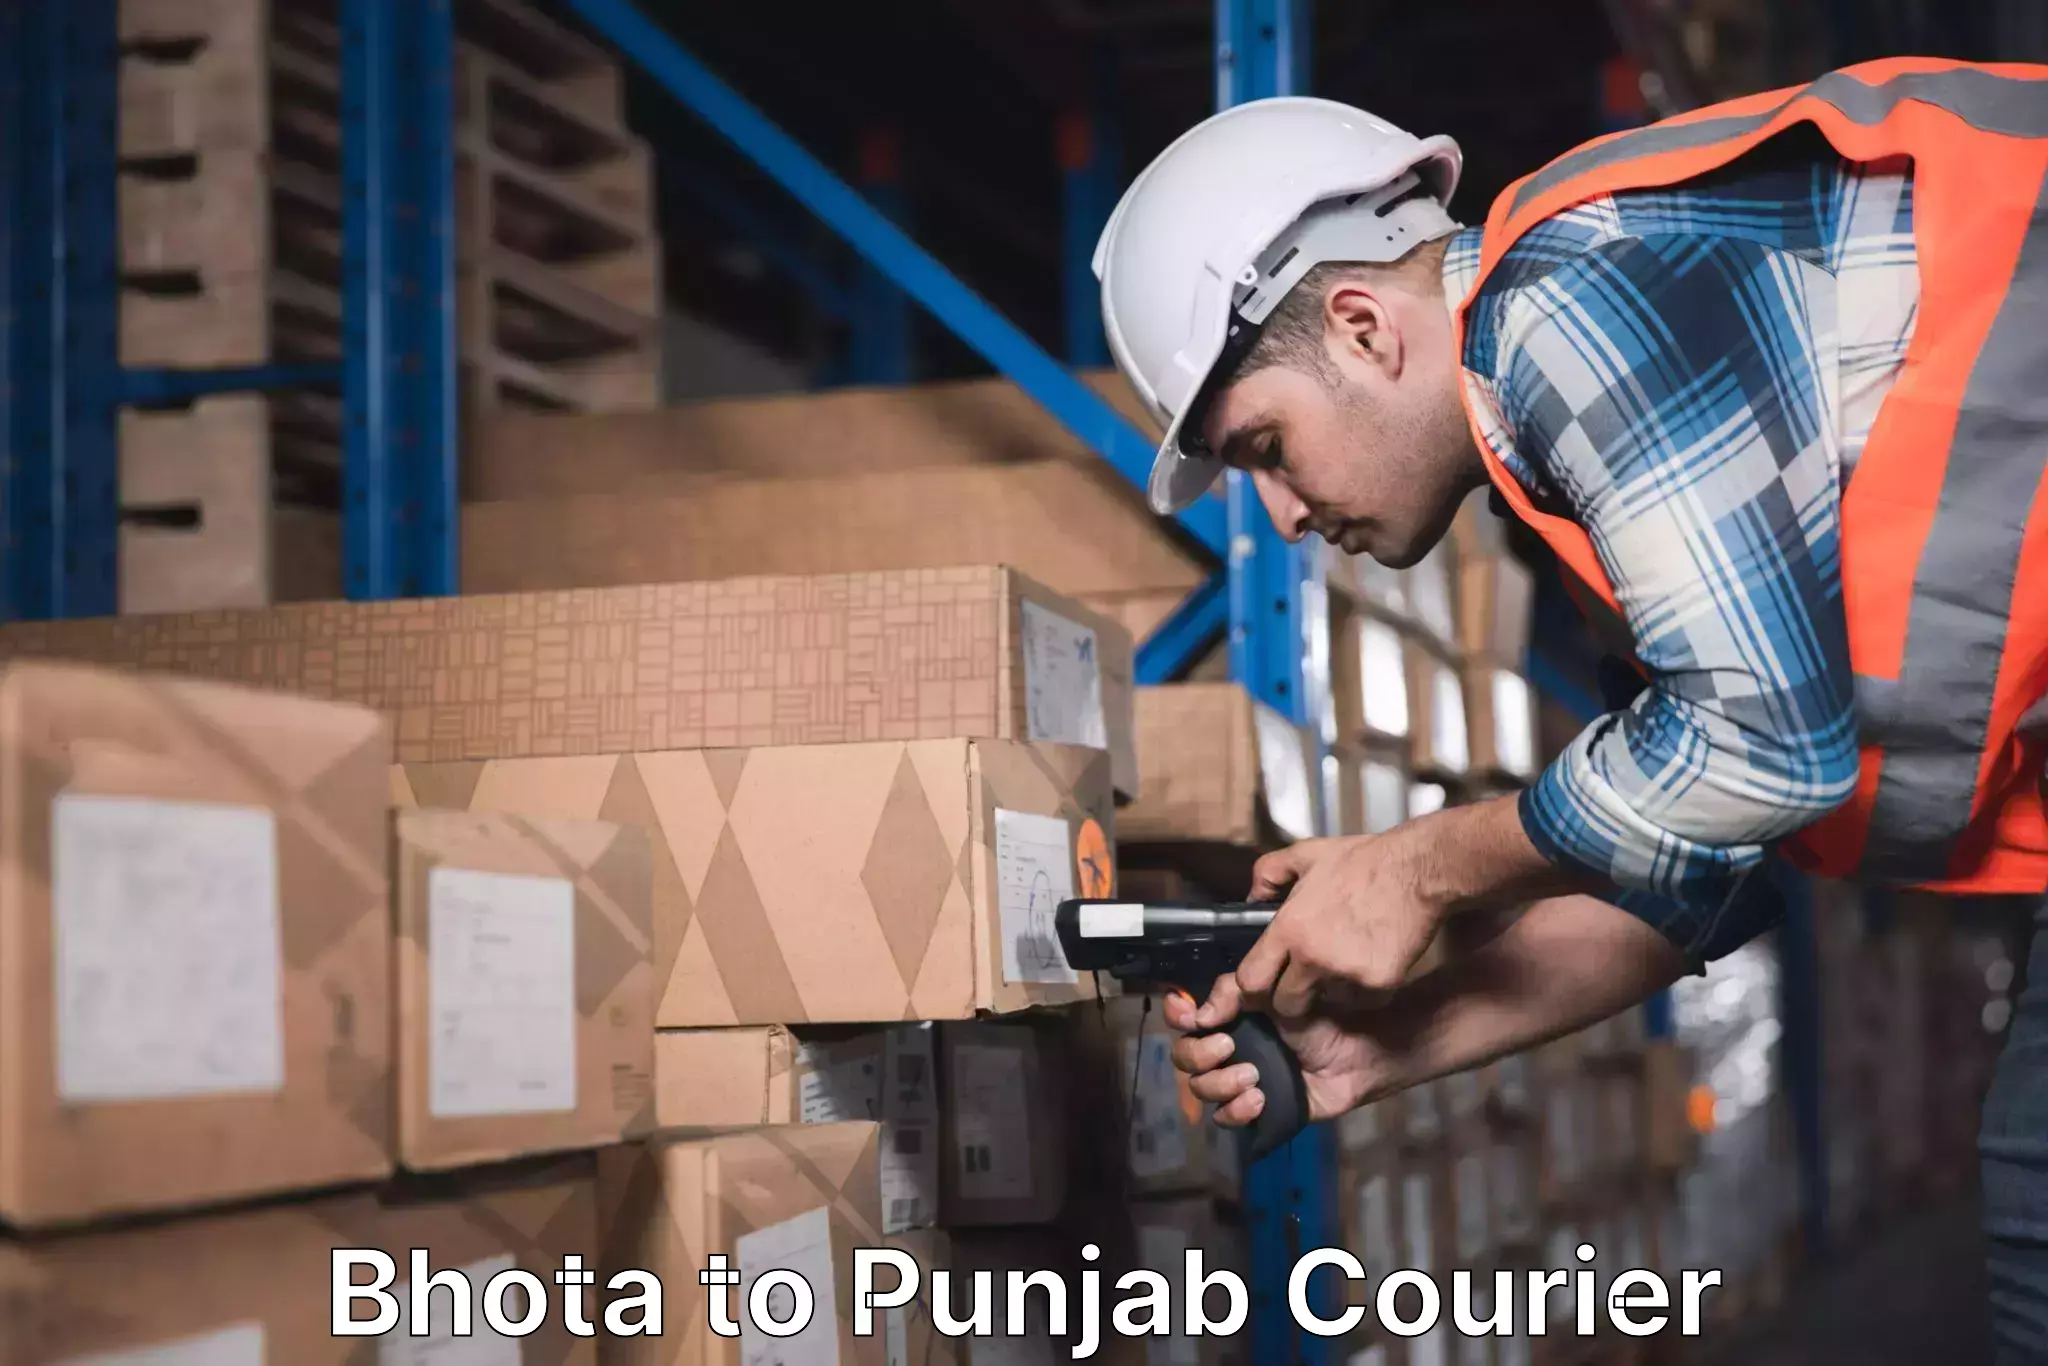 Next-day delivery options Bhota to Zirakpur